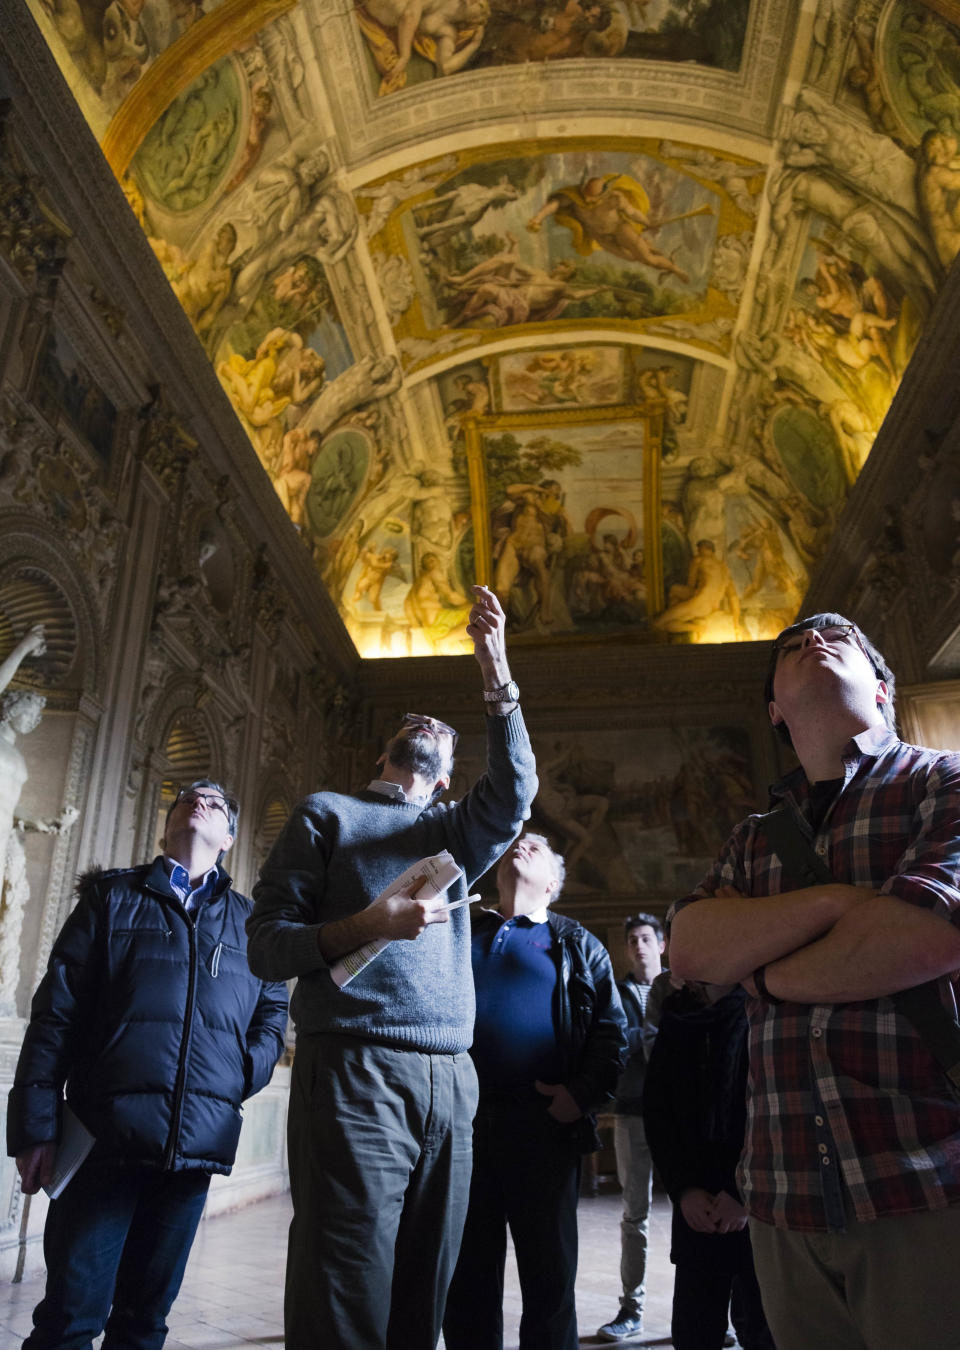 A guide, second from left, shows the frescoed ceilings of the Carracci Gallery in the Farnese Palace that hosts the French Embassy in Rome, Wednesday, Feb. 26, 2014. The World Monuments Fund Europe will allocate some 800 million Euros for the restoration of the about 140 square meters of 16th century frescoes by Annibale and Agostino Carracci that will begin mid March and are expected to be completed in 2015. (AP Photo/Domenico Stinellis)